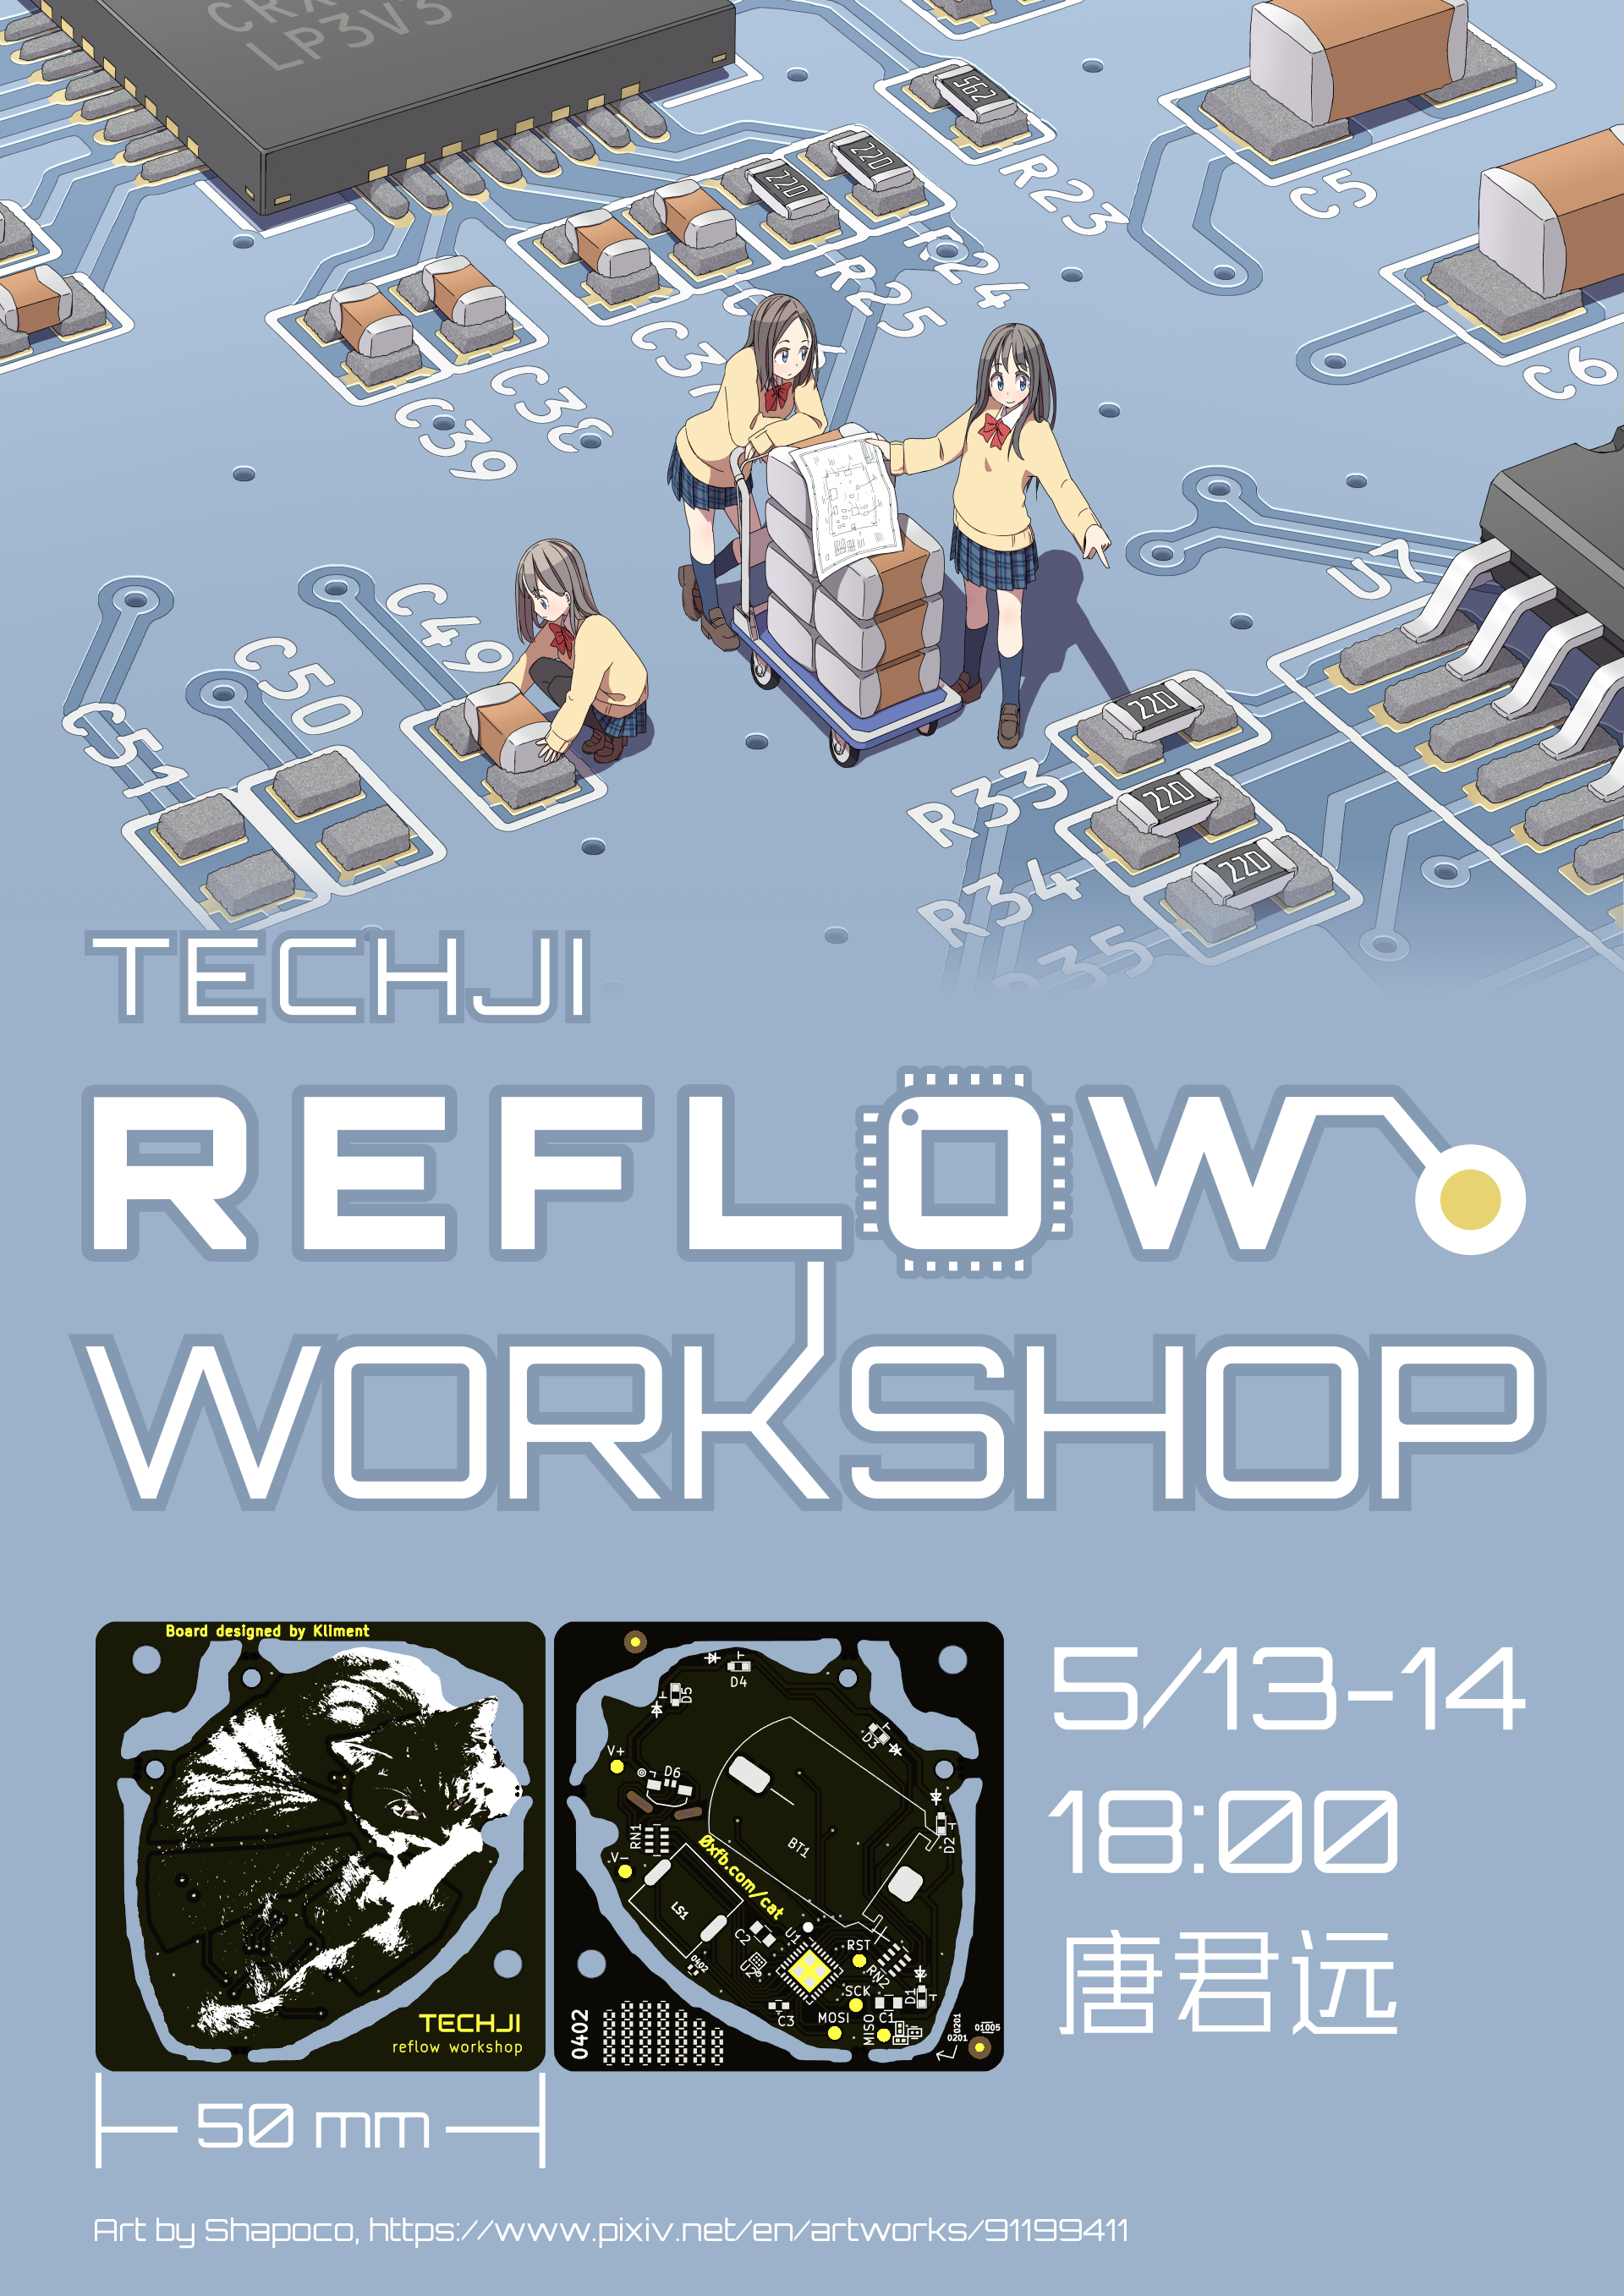 From top to bottom: anime girls pic, "TECHJI REFLOW WORKSHOP", PCB
renderings, 5/13-14 18:00 唐君远, and credit for the
illustration